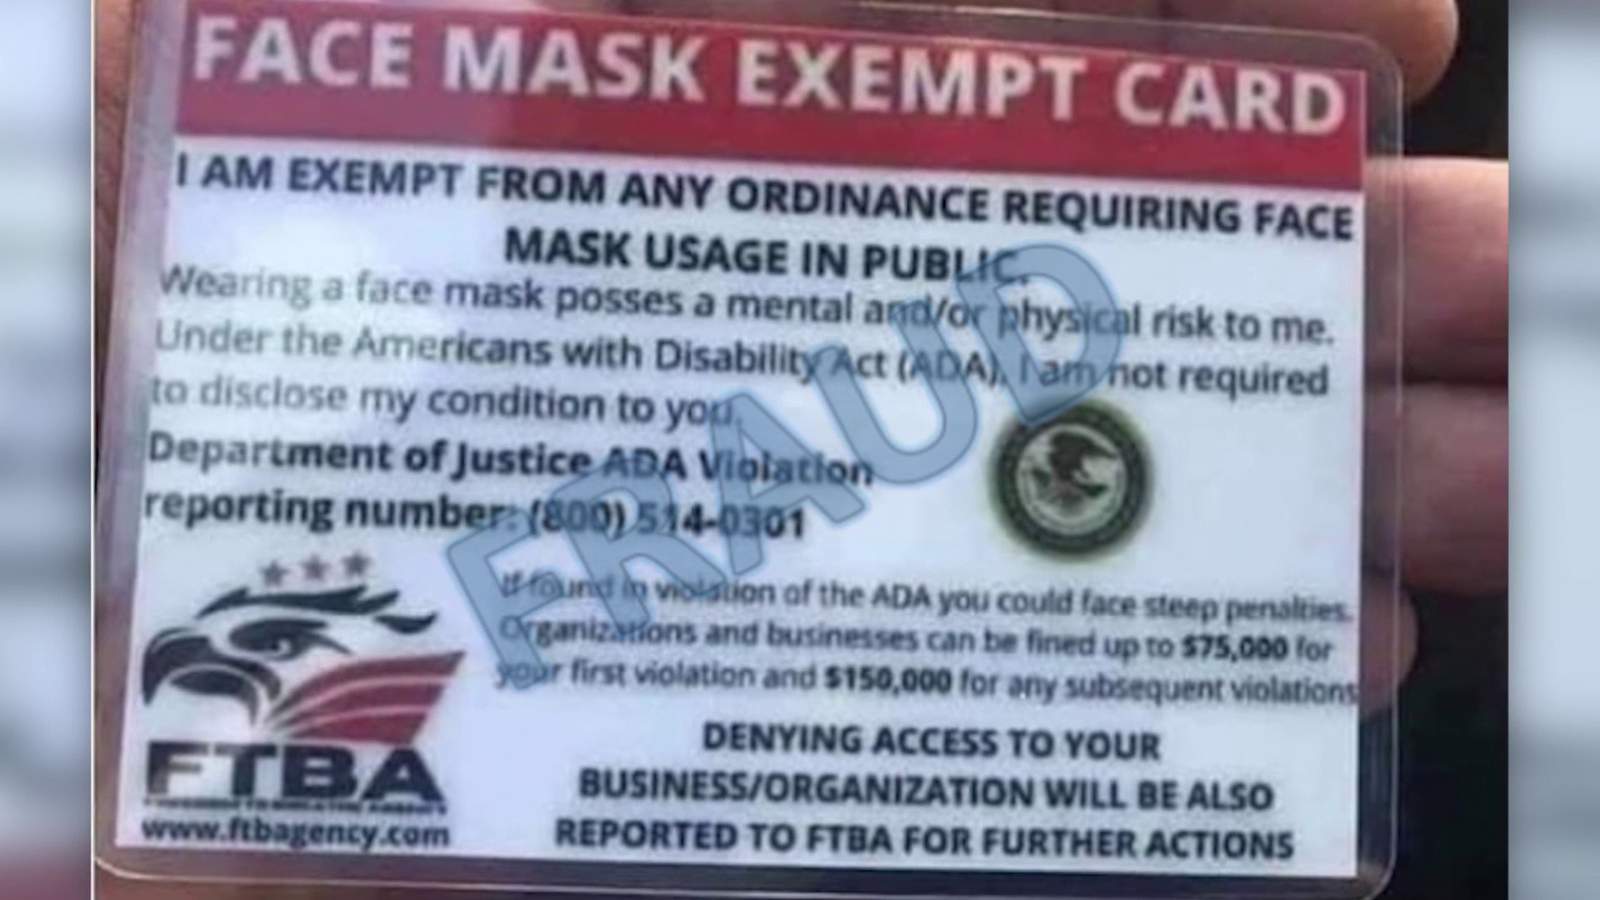 Those face mask exemption cards are fake, feds warn